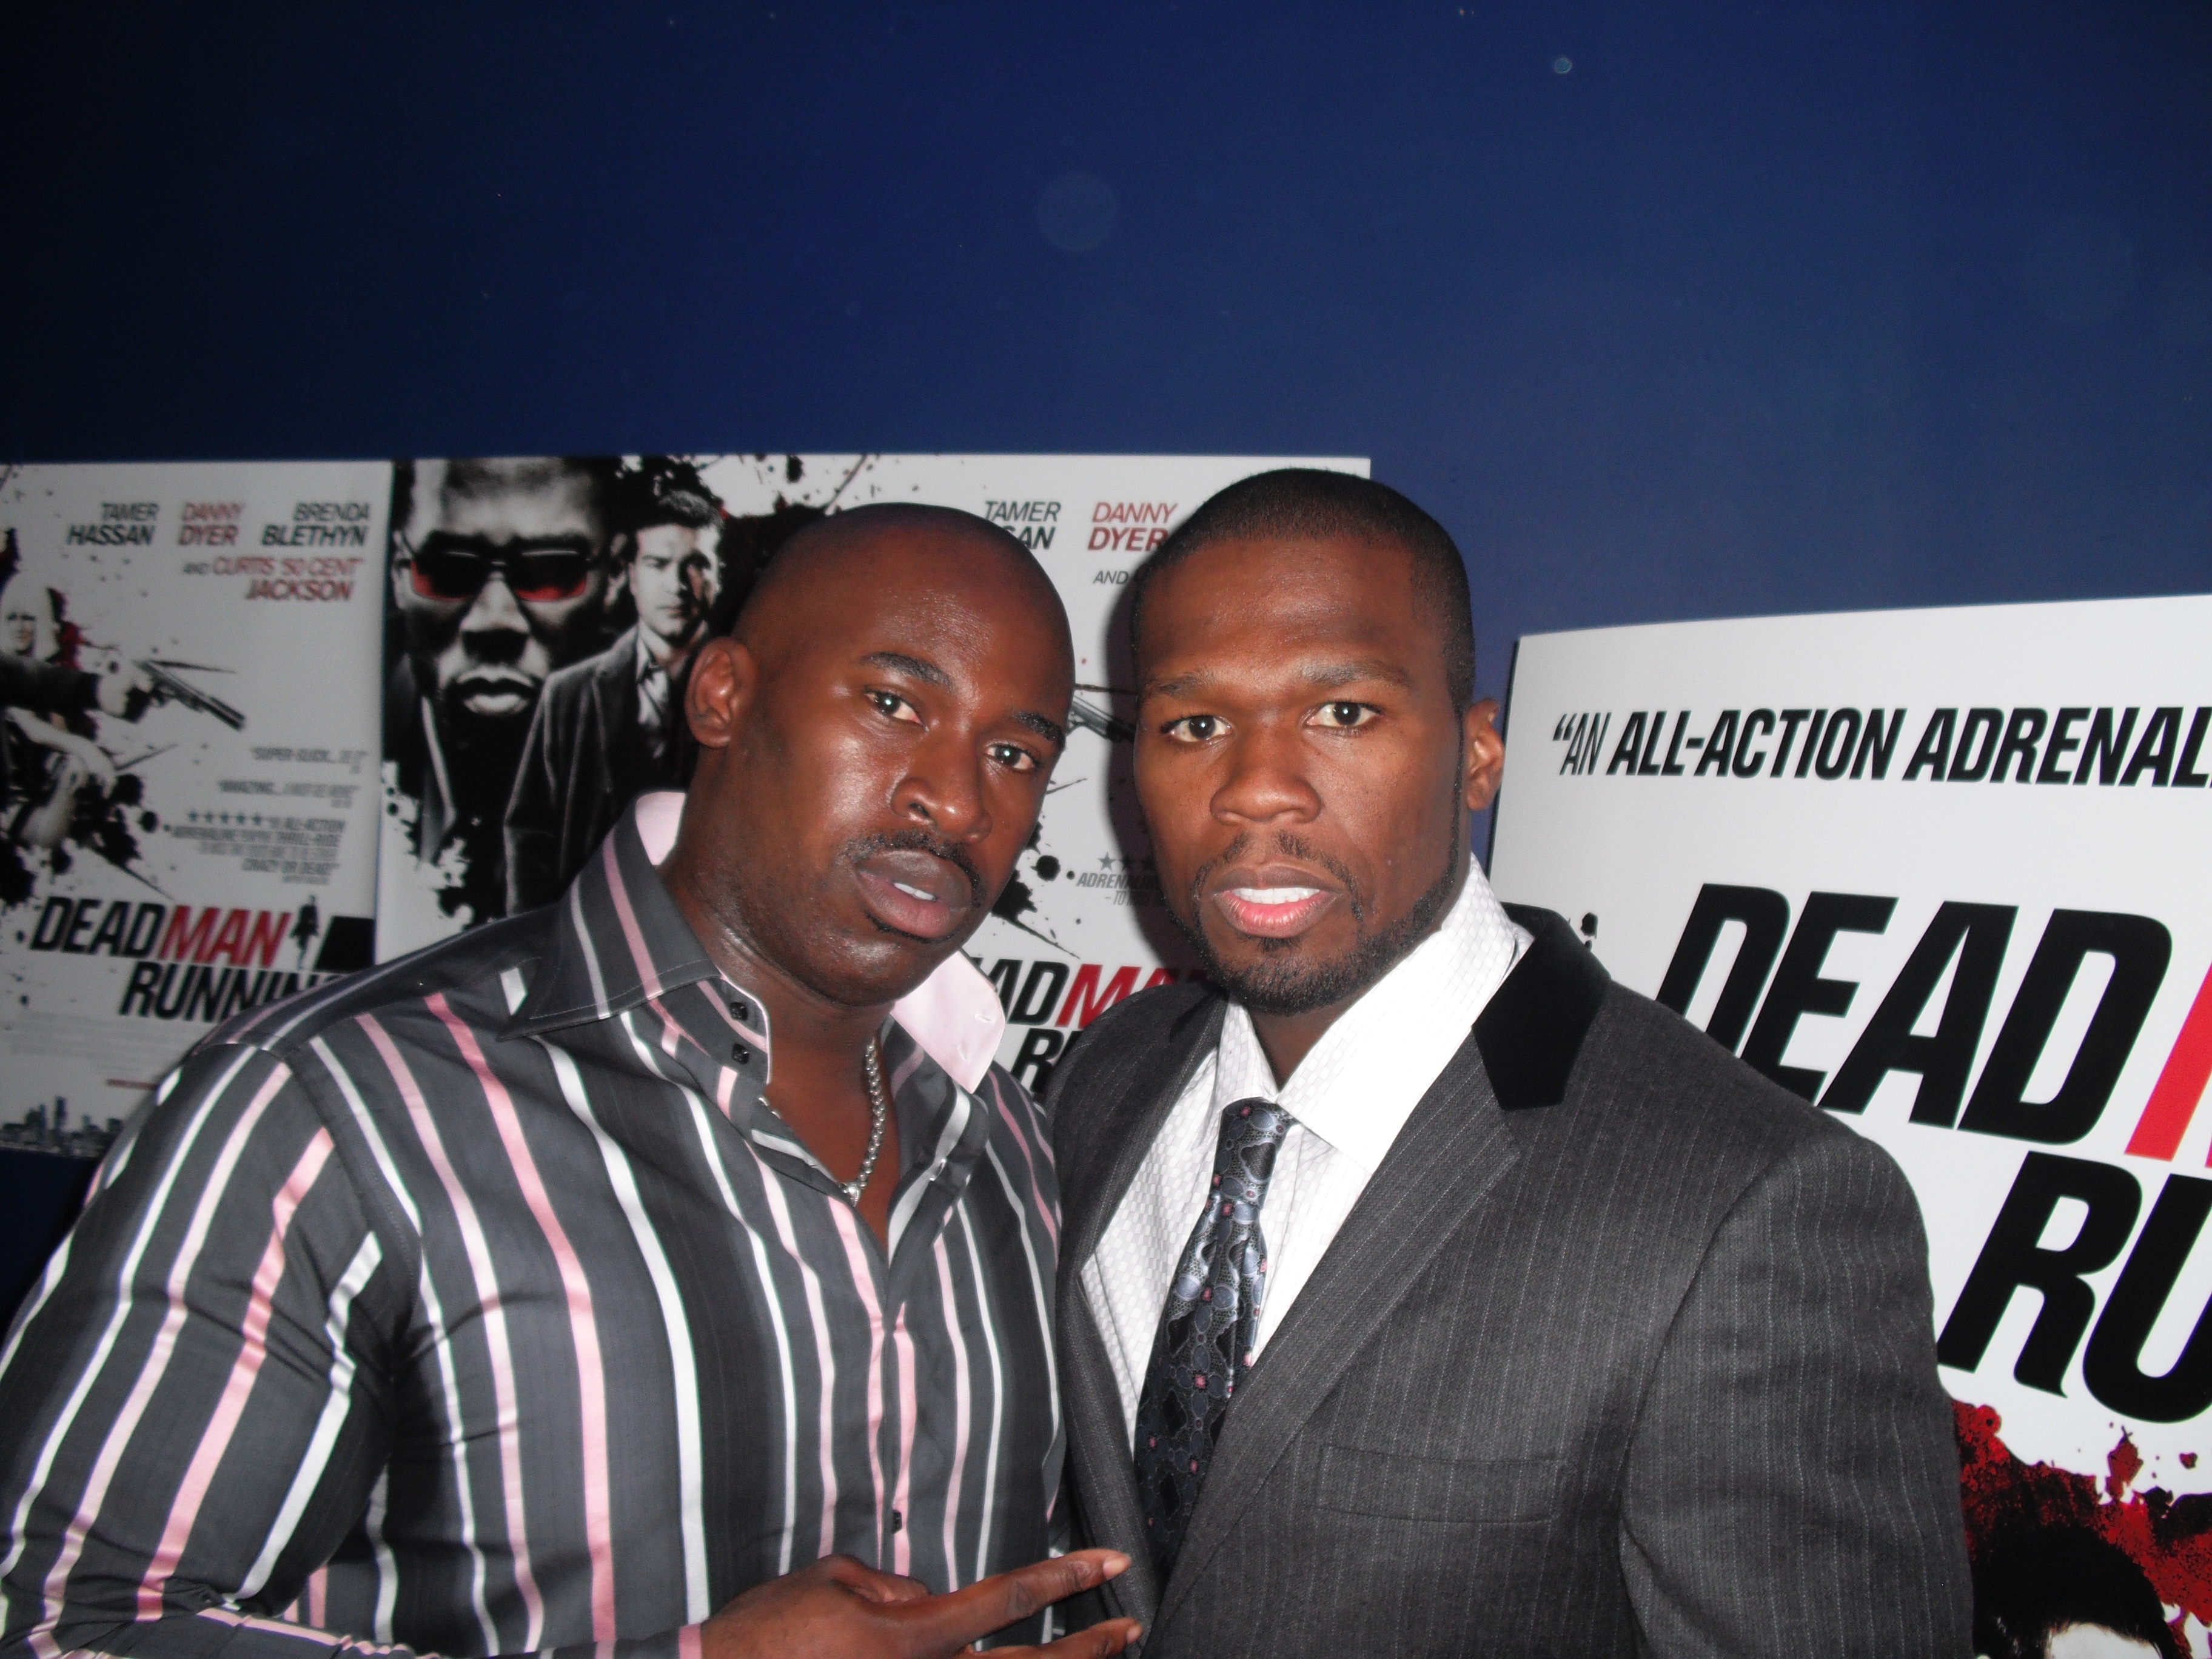 Me and Curtis '50CENT' Jackson at the premiere for DEAD MAN RUNNING in which i play character 'RUDE BWOY', Mr THIGO'S Henchman.